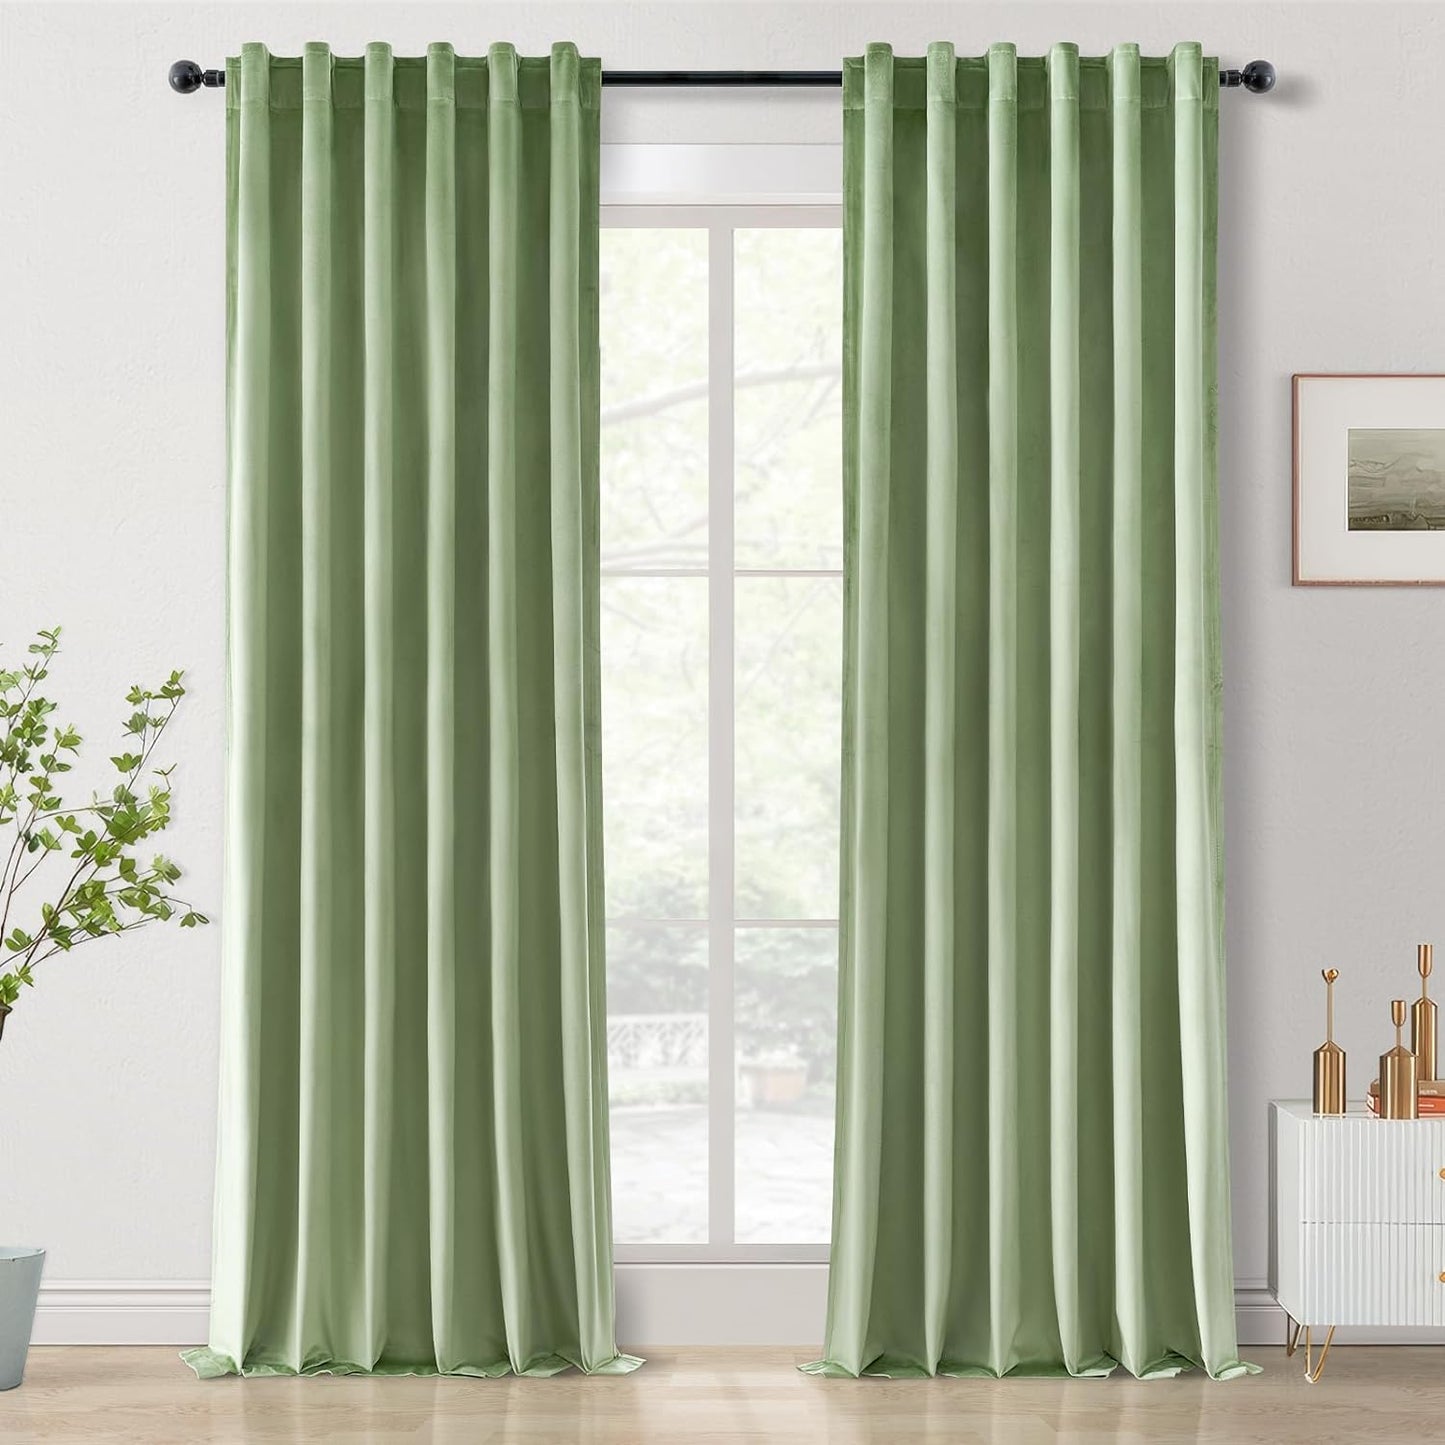 Topfinel Olive Green Velvet Curtains 84 Inches Long for Living Room,Blackout Thermal Insulated Curtains for Bedroom,Back Tab Modern Window Treatment for Living Room,52X84 Inch Length,Olive Green  Top Fine Sage Green 52" X 84" 